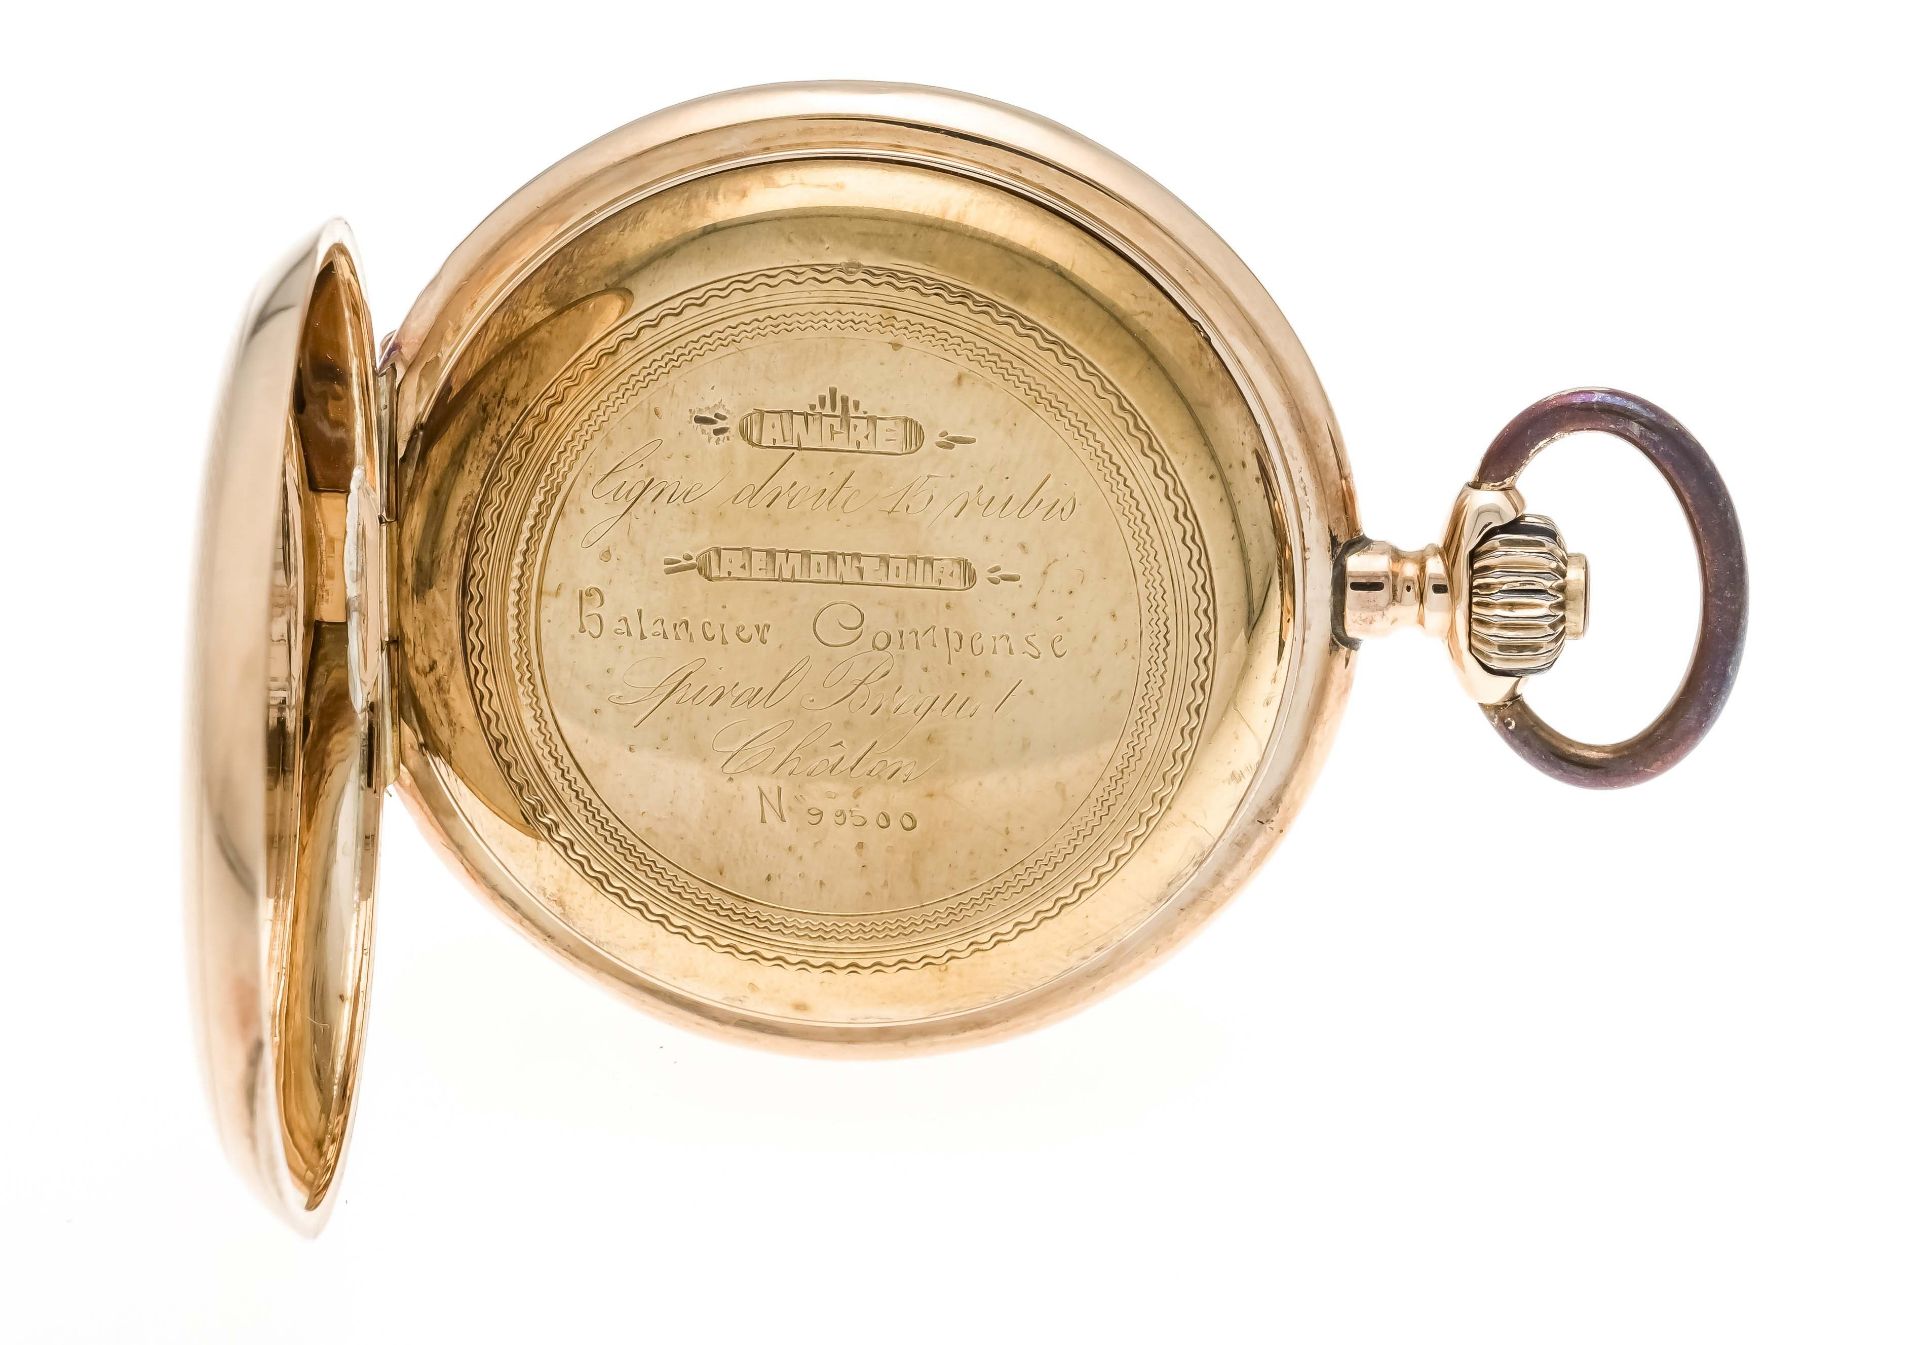 A gentleman's sprung-cap pocket watch, 585/000 GG, 2 gold covers, engine-turned case on both - Image 3 of 5